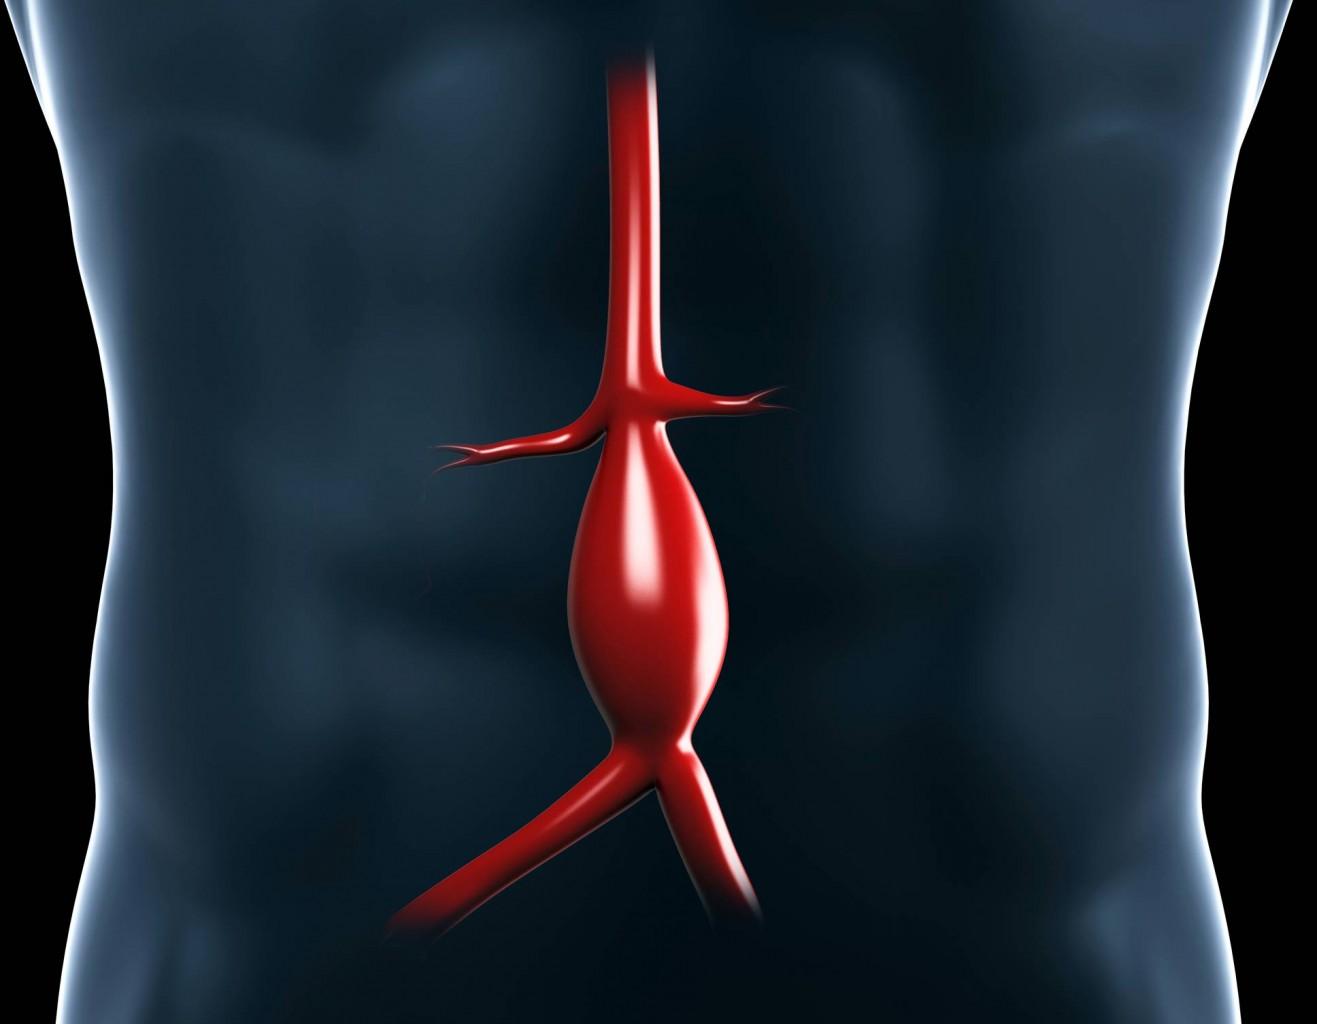 Aortica Corporation Creates 3DPrinted Alternative to Surgery for Abdominal Aortic Aneurysms 